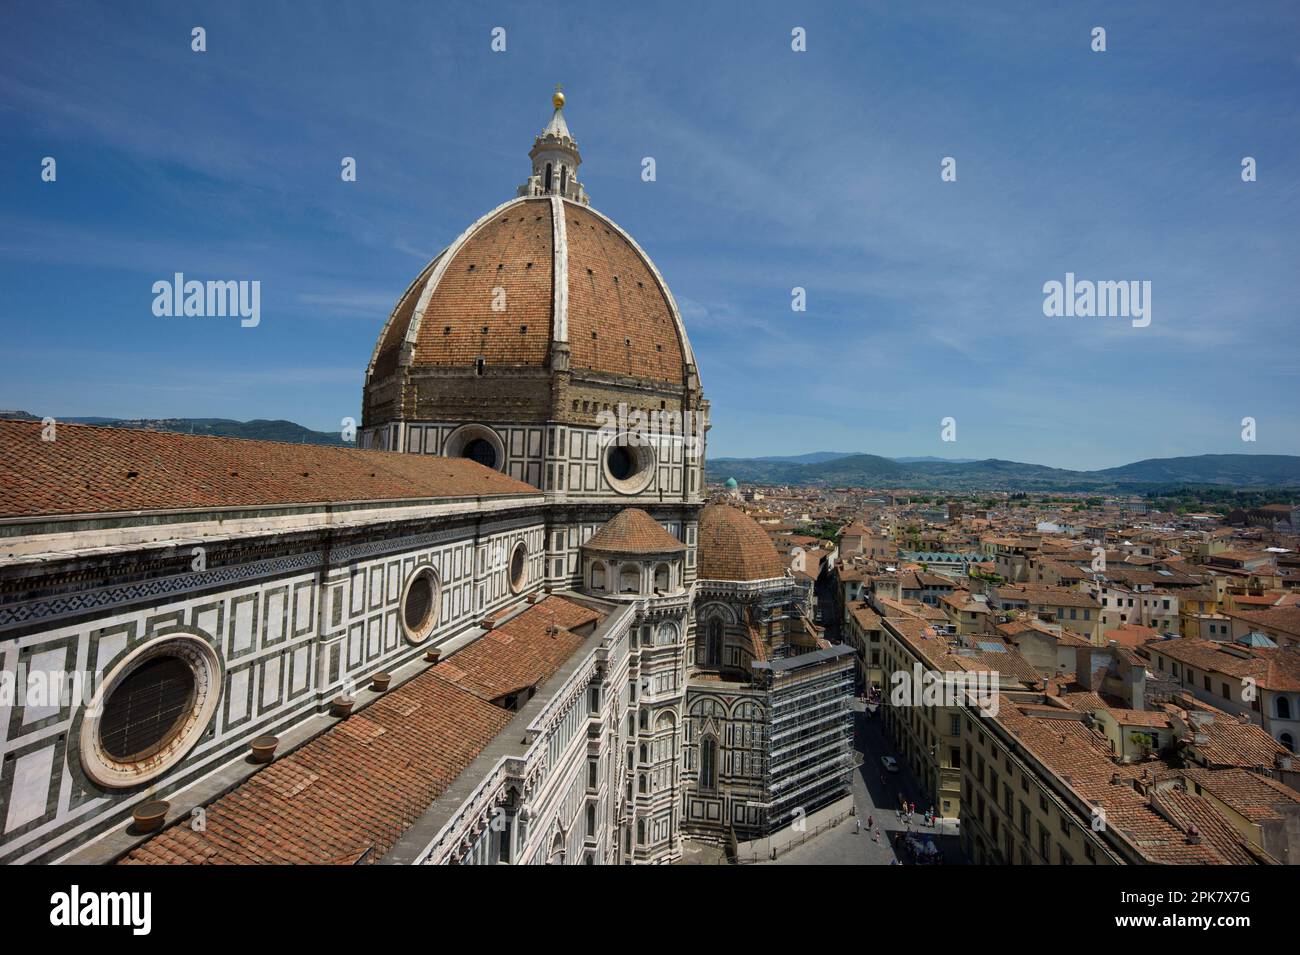 View from Cattedrale di Santa Maria del Fiore, Florence, Italy Stock Photo